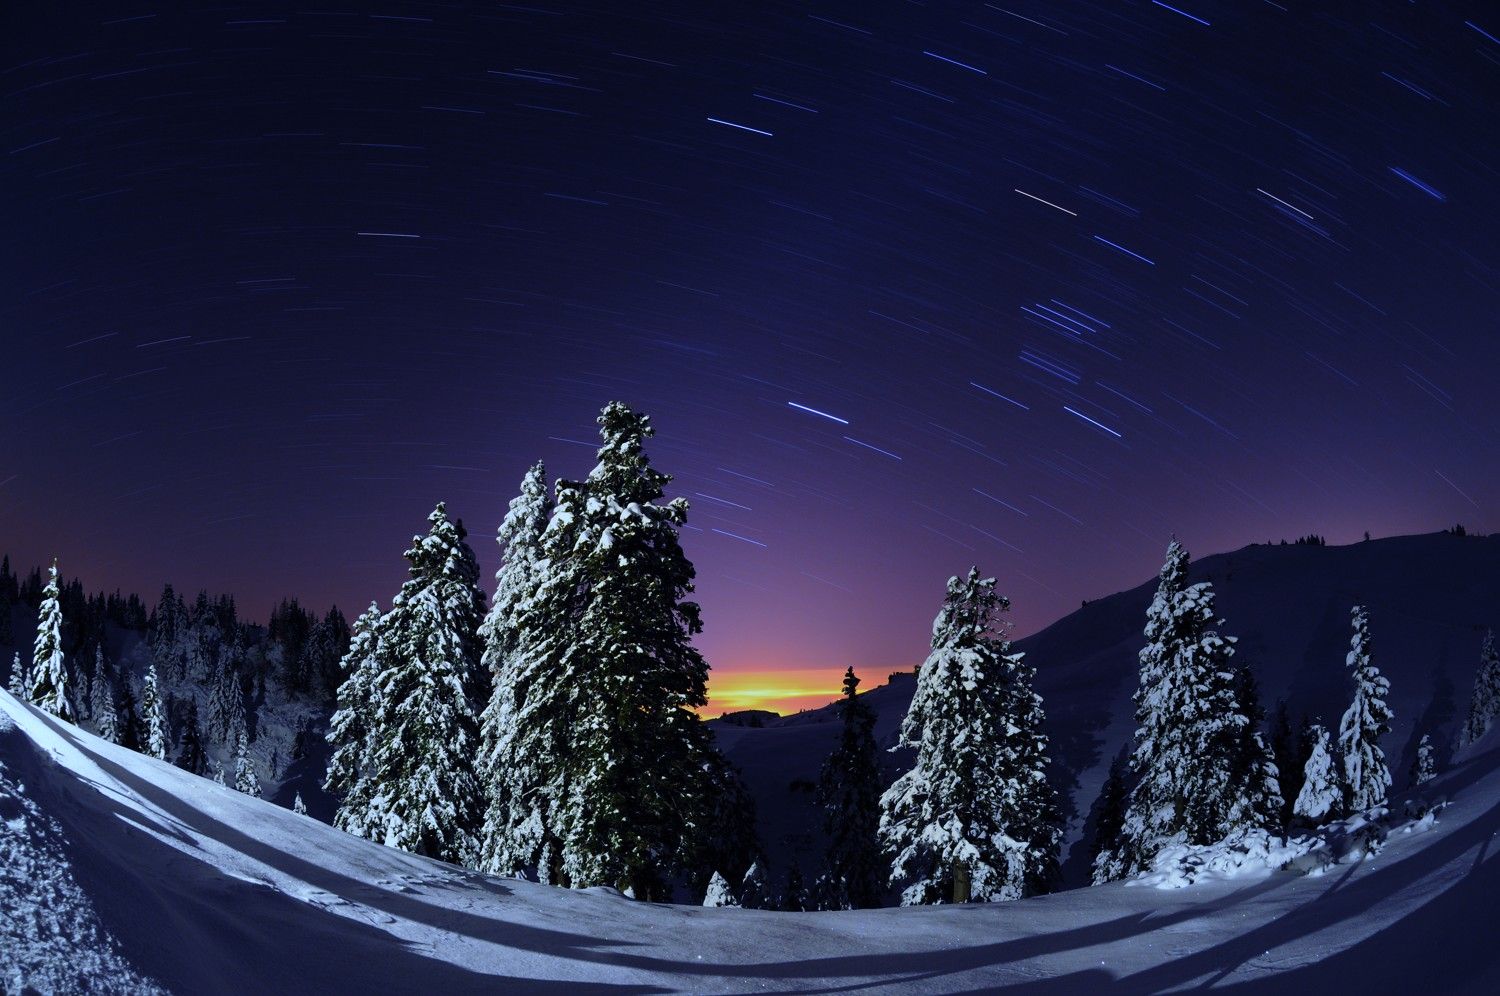 Incentive of sledding under clear winter night skies - KONGRES